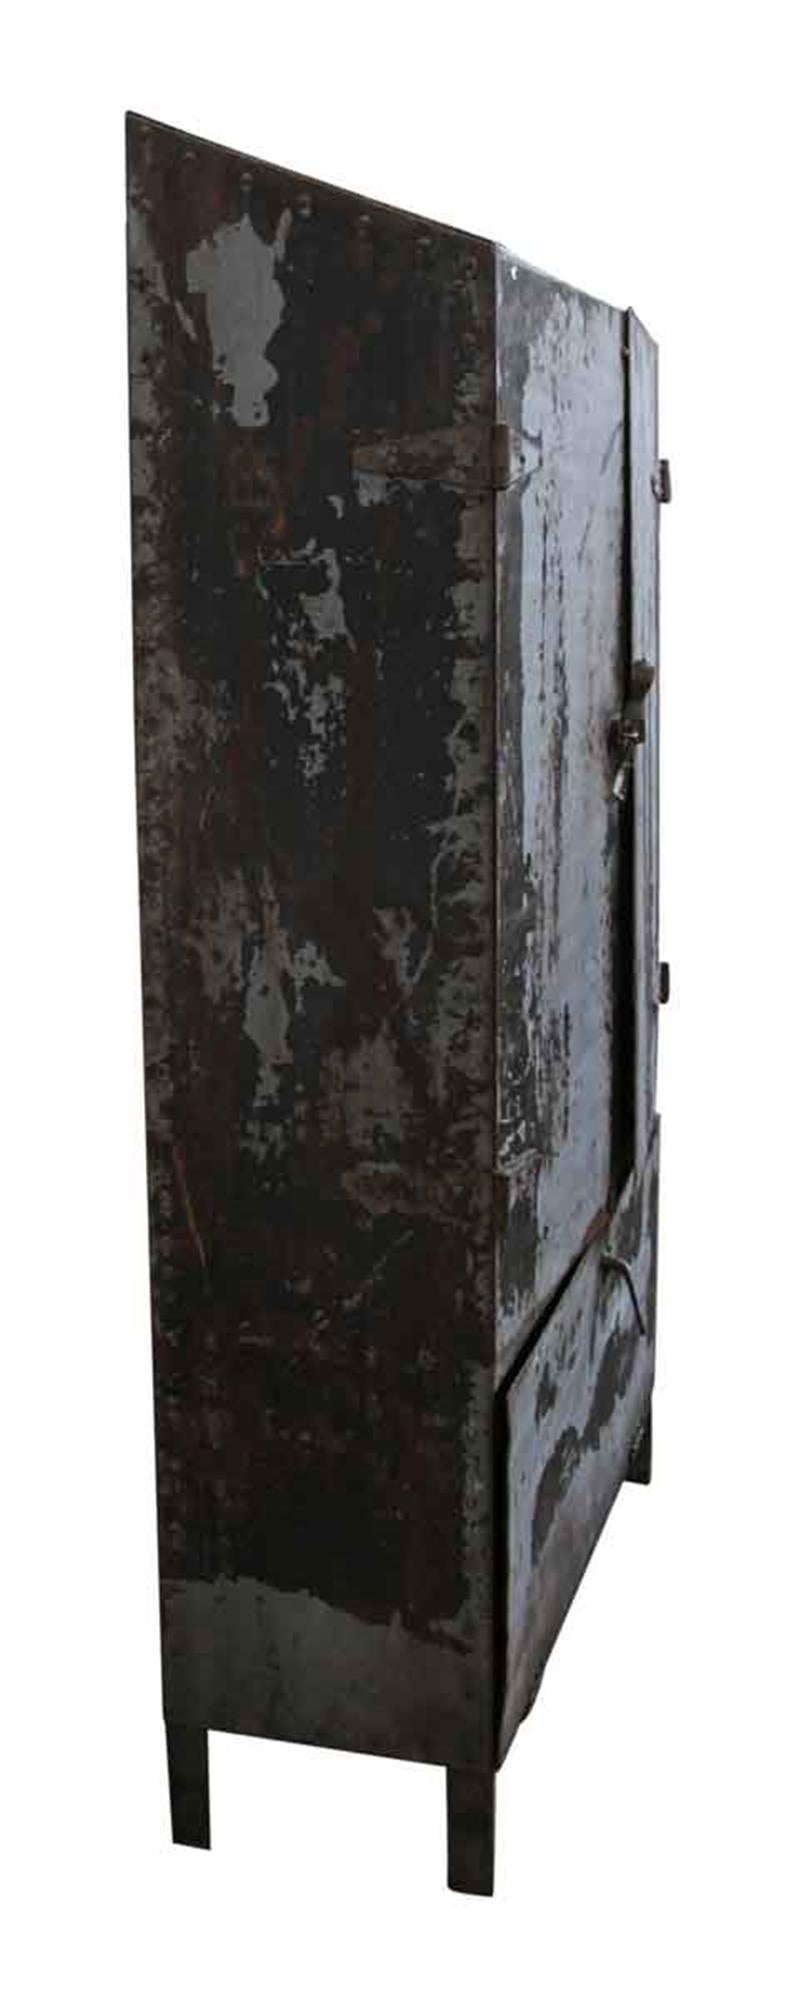 1930s Vintage Industrial Steel Cabinet Half Stripped and Lacquered 3